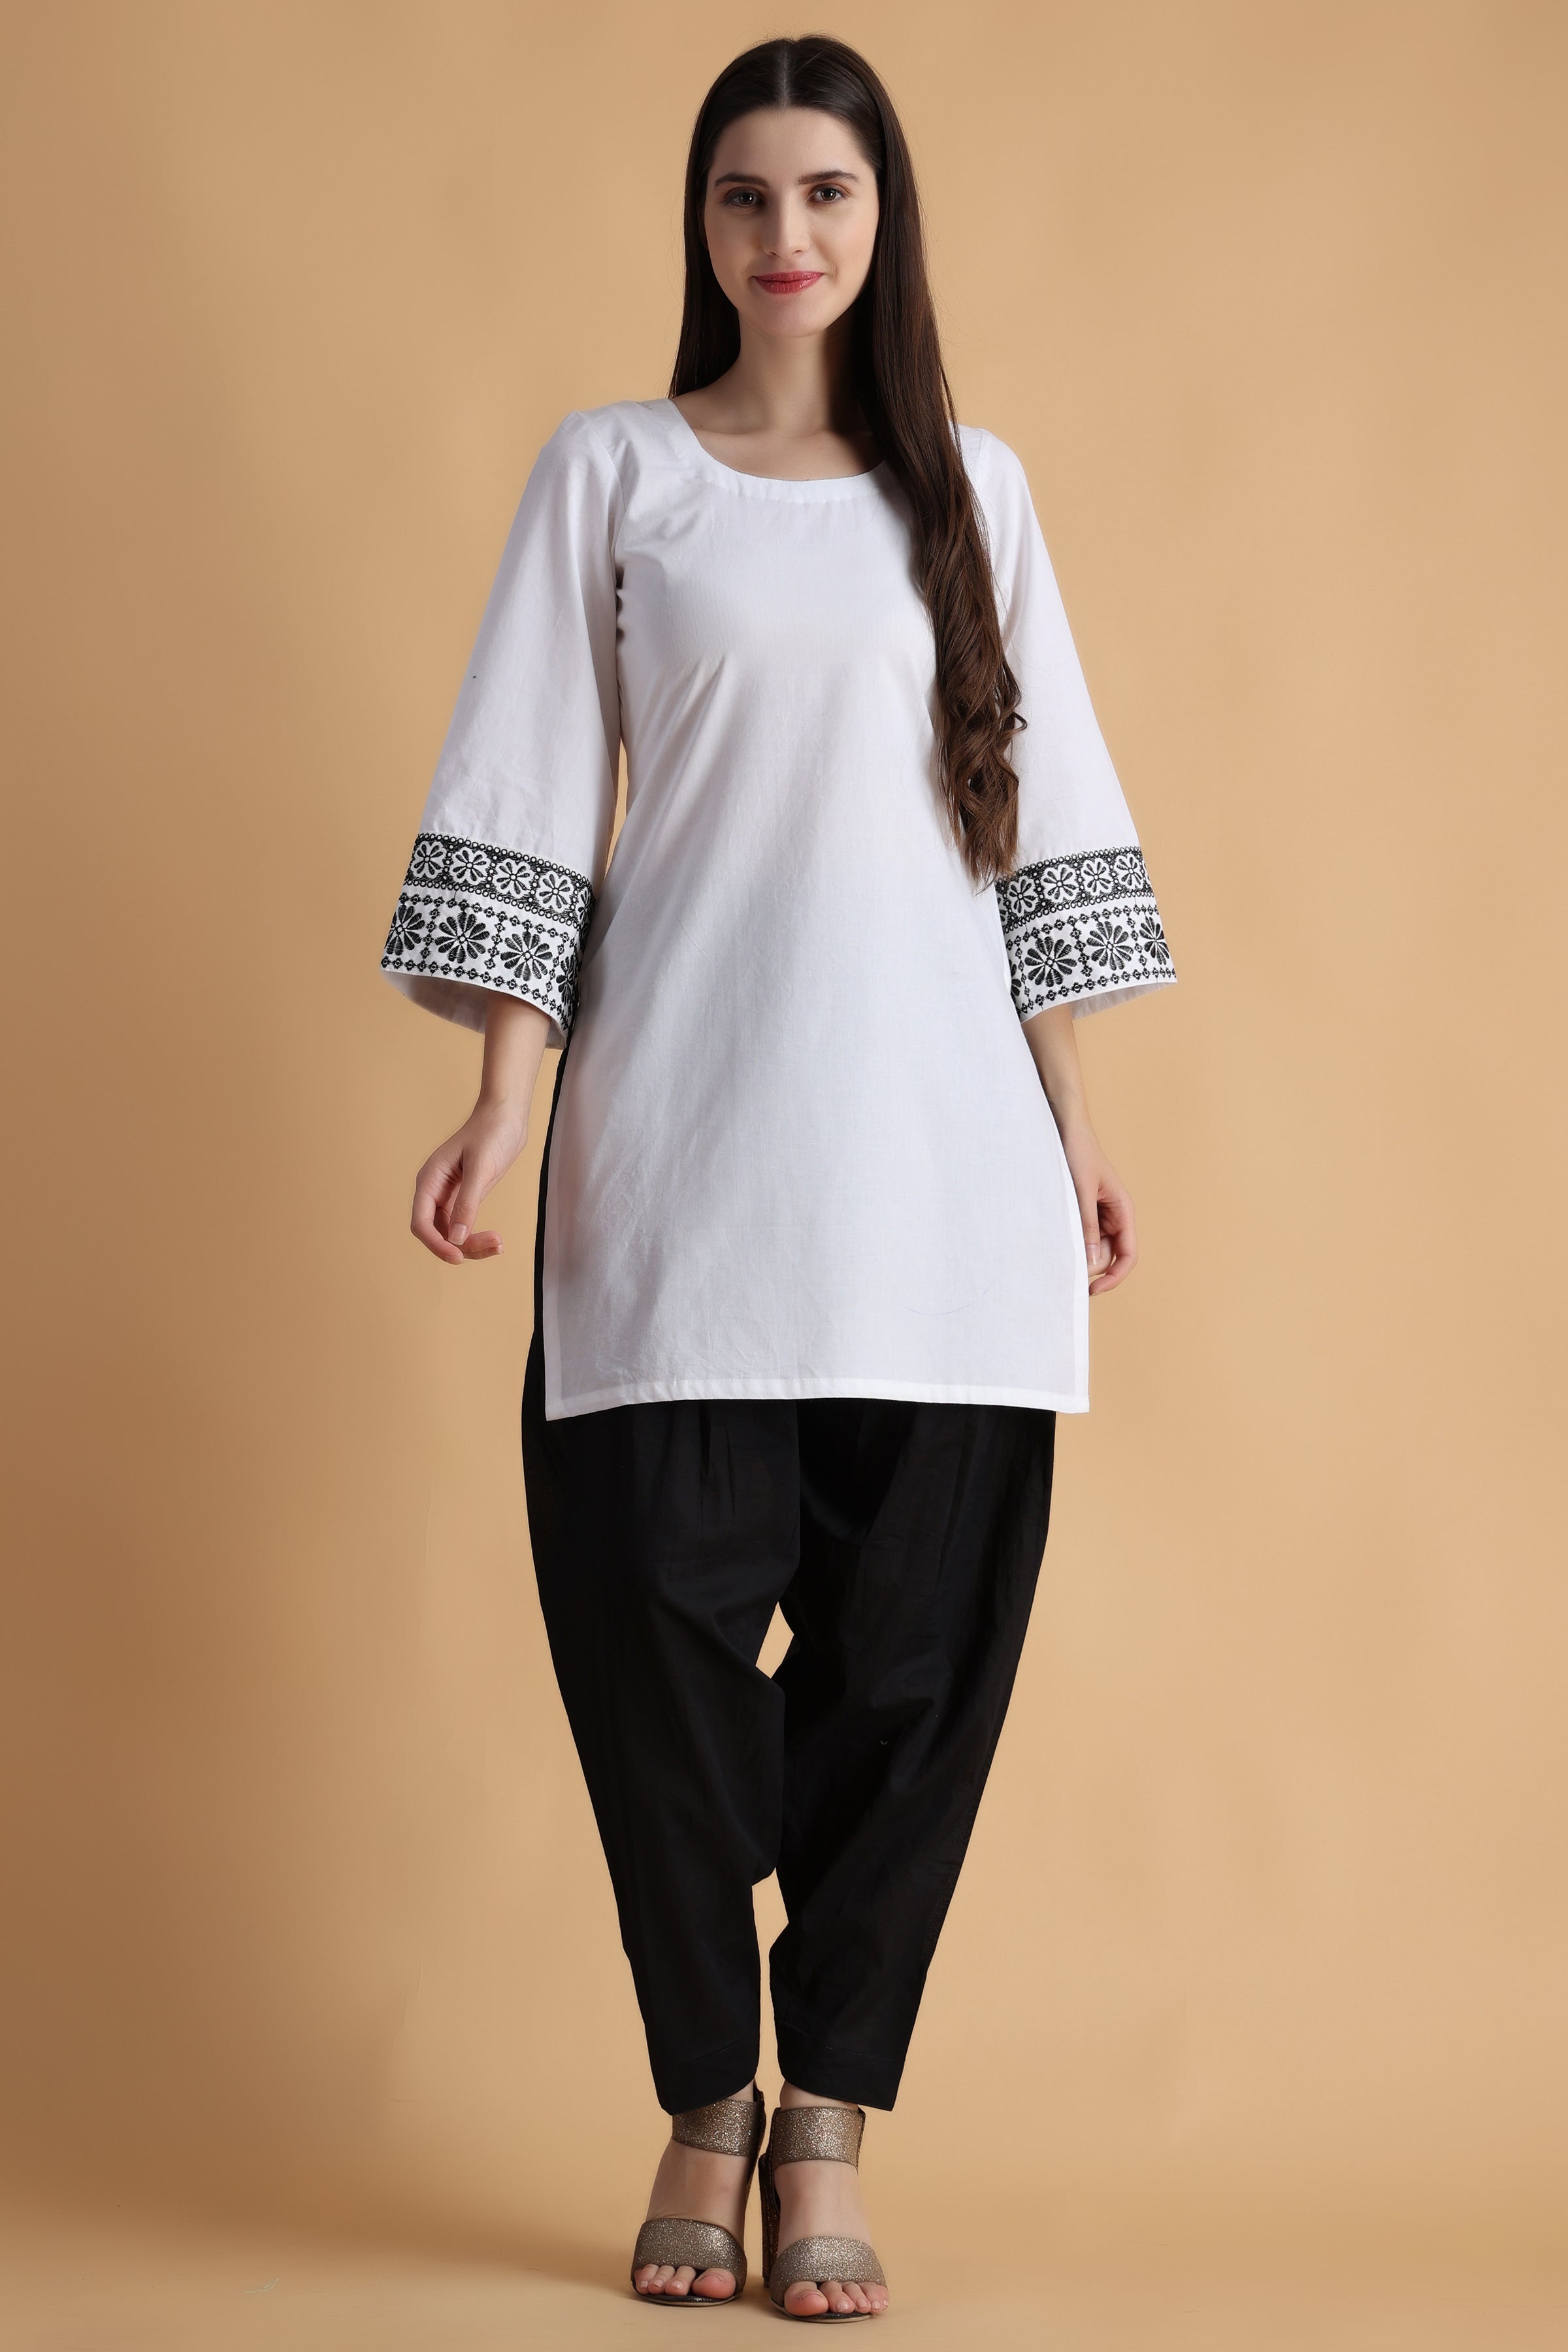 Discover more than 123 white short kurti for ladies